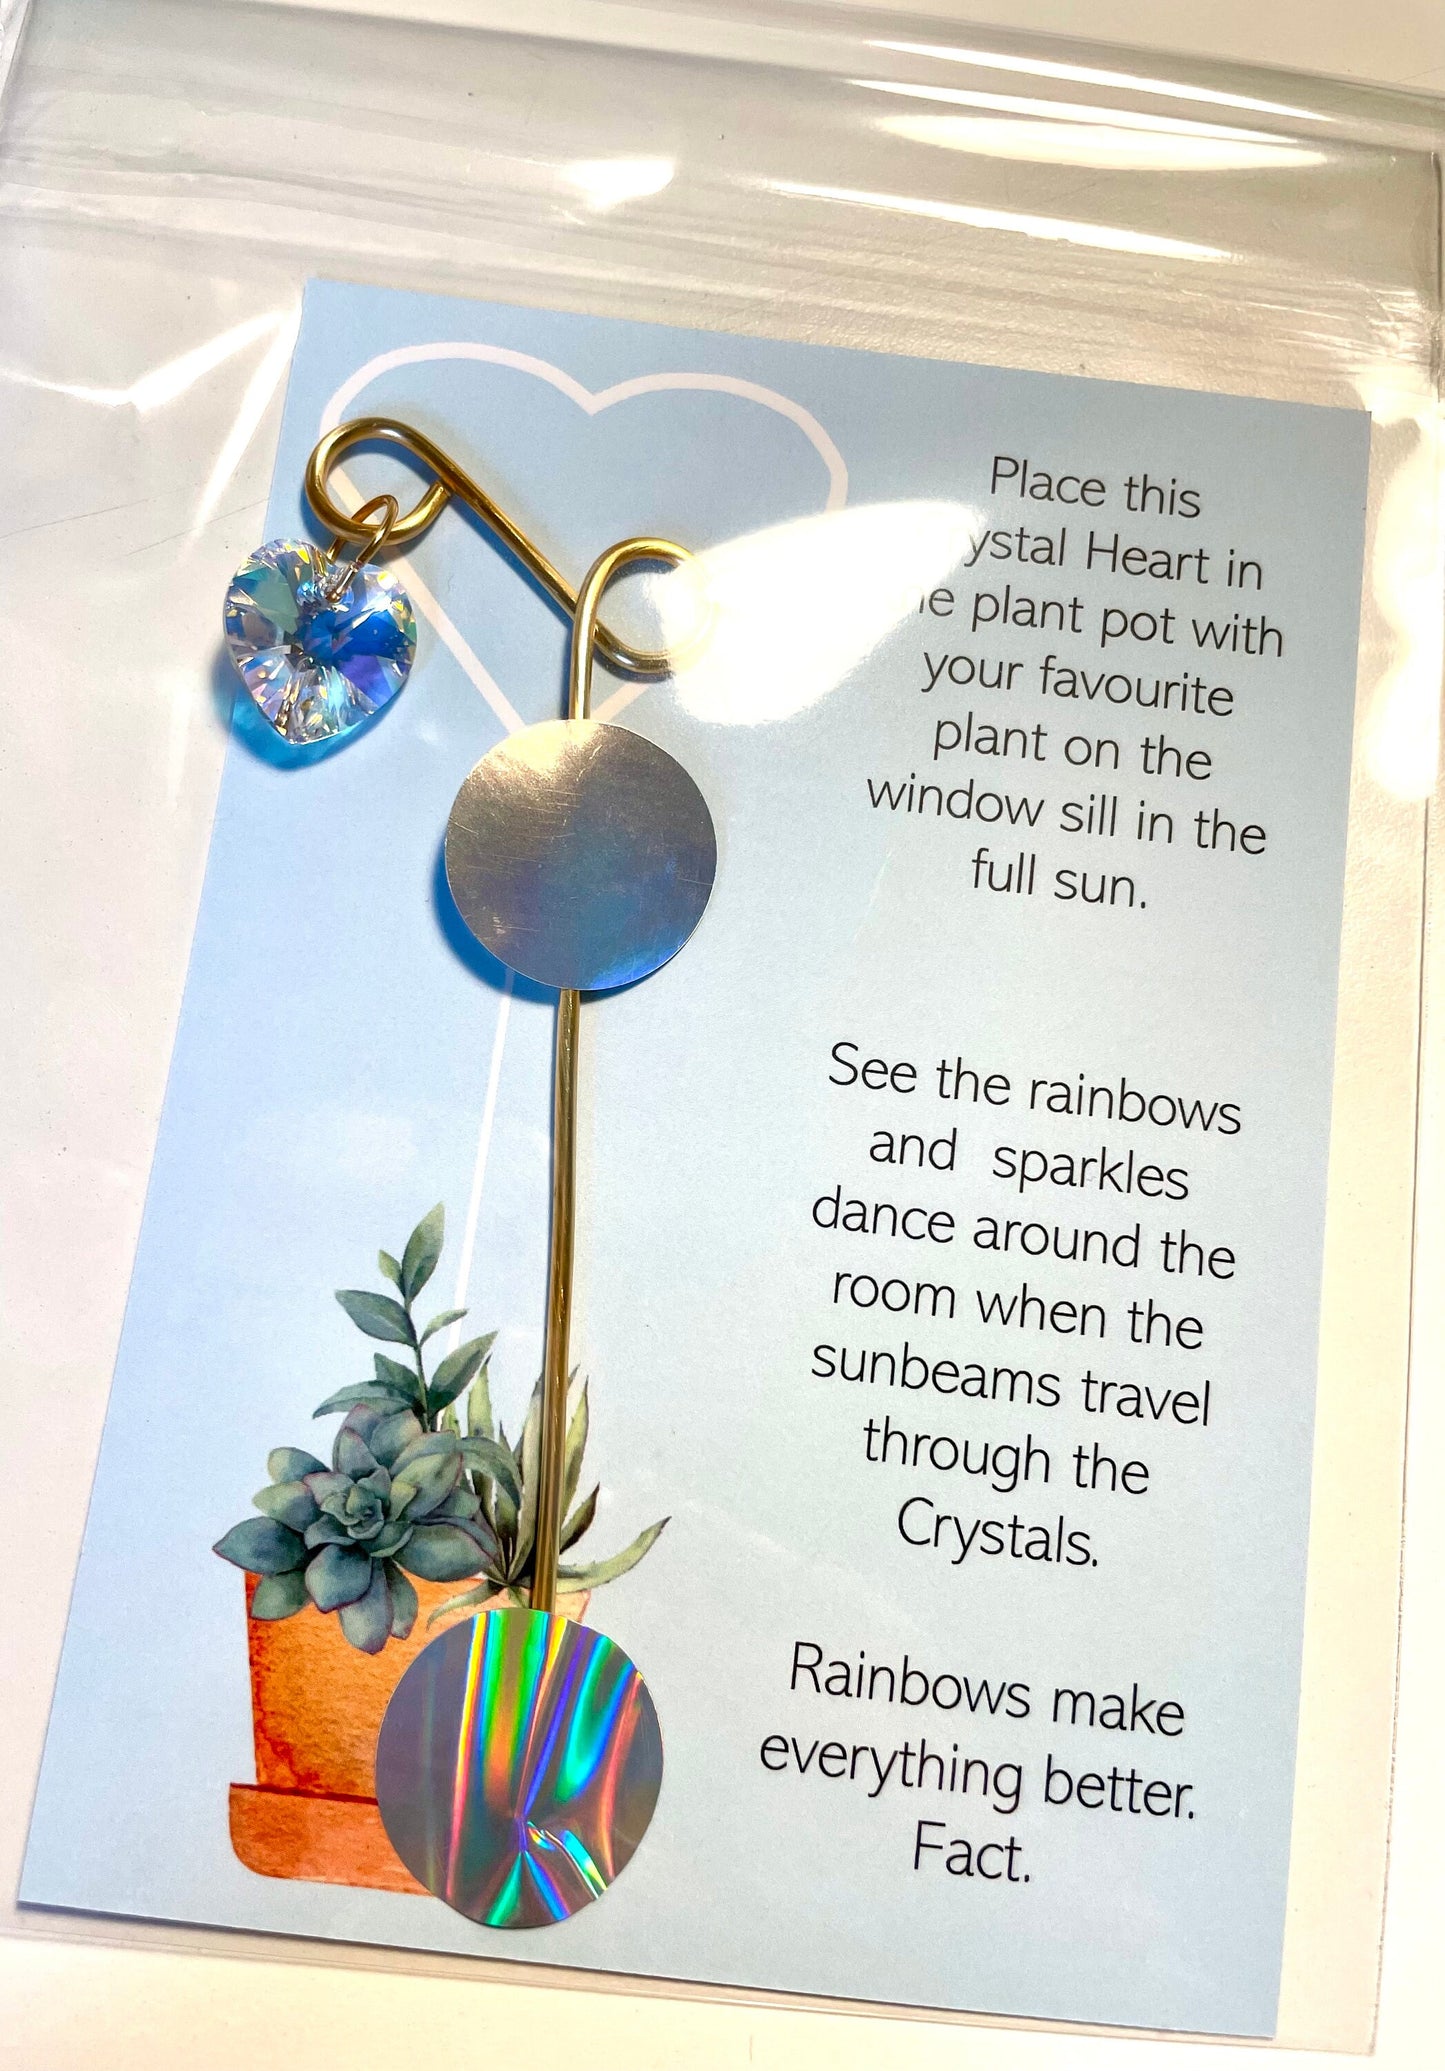 Handcrafted Crystal Heart Plant Marker - Sprinkle Magic on Your Windowsill